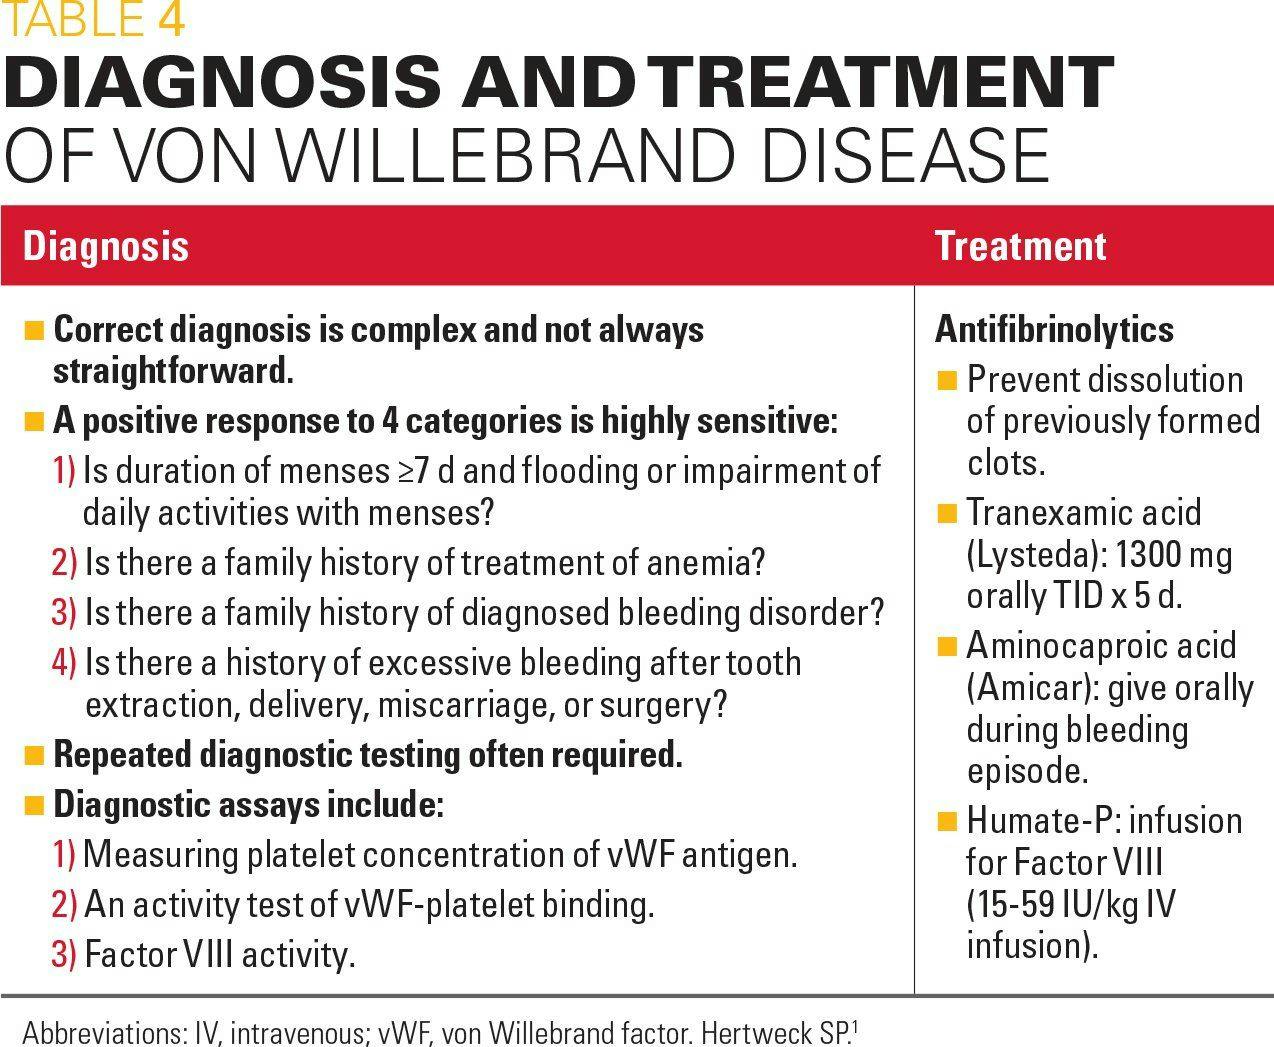 Diagnosis and treatment of von Willebrand disease